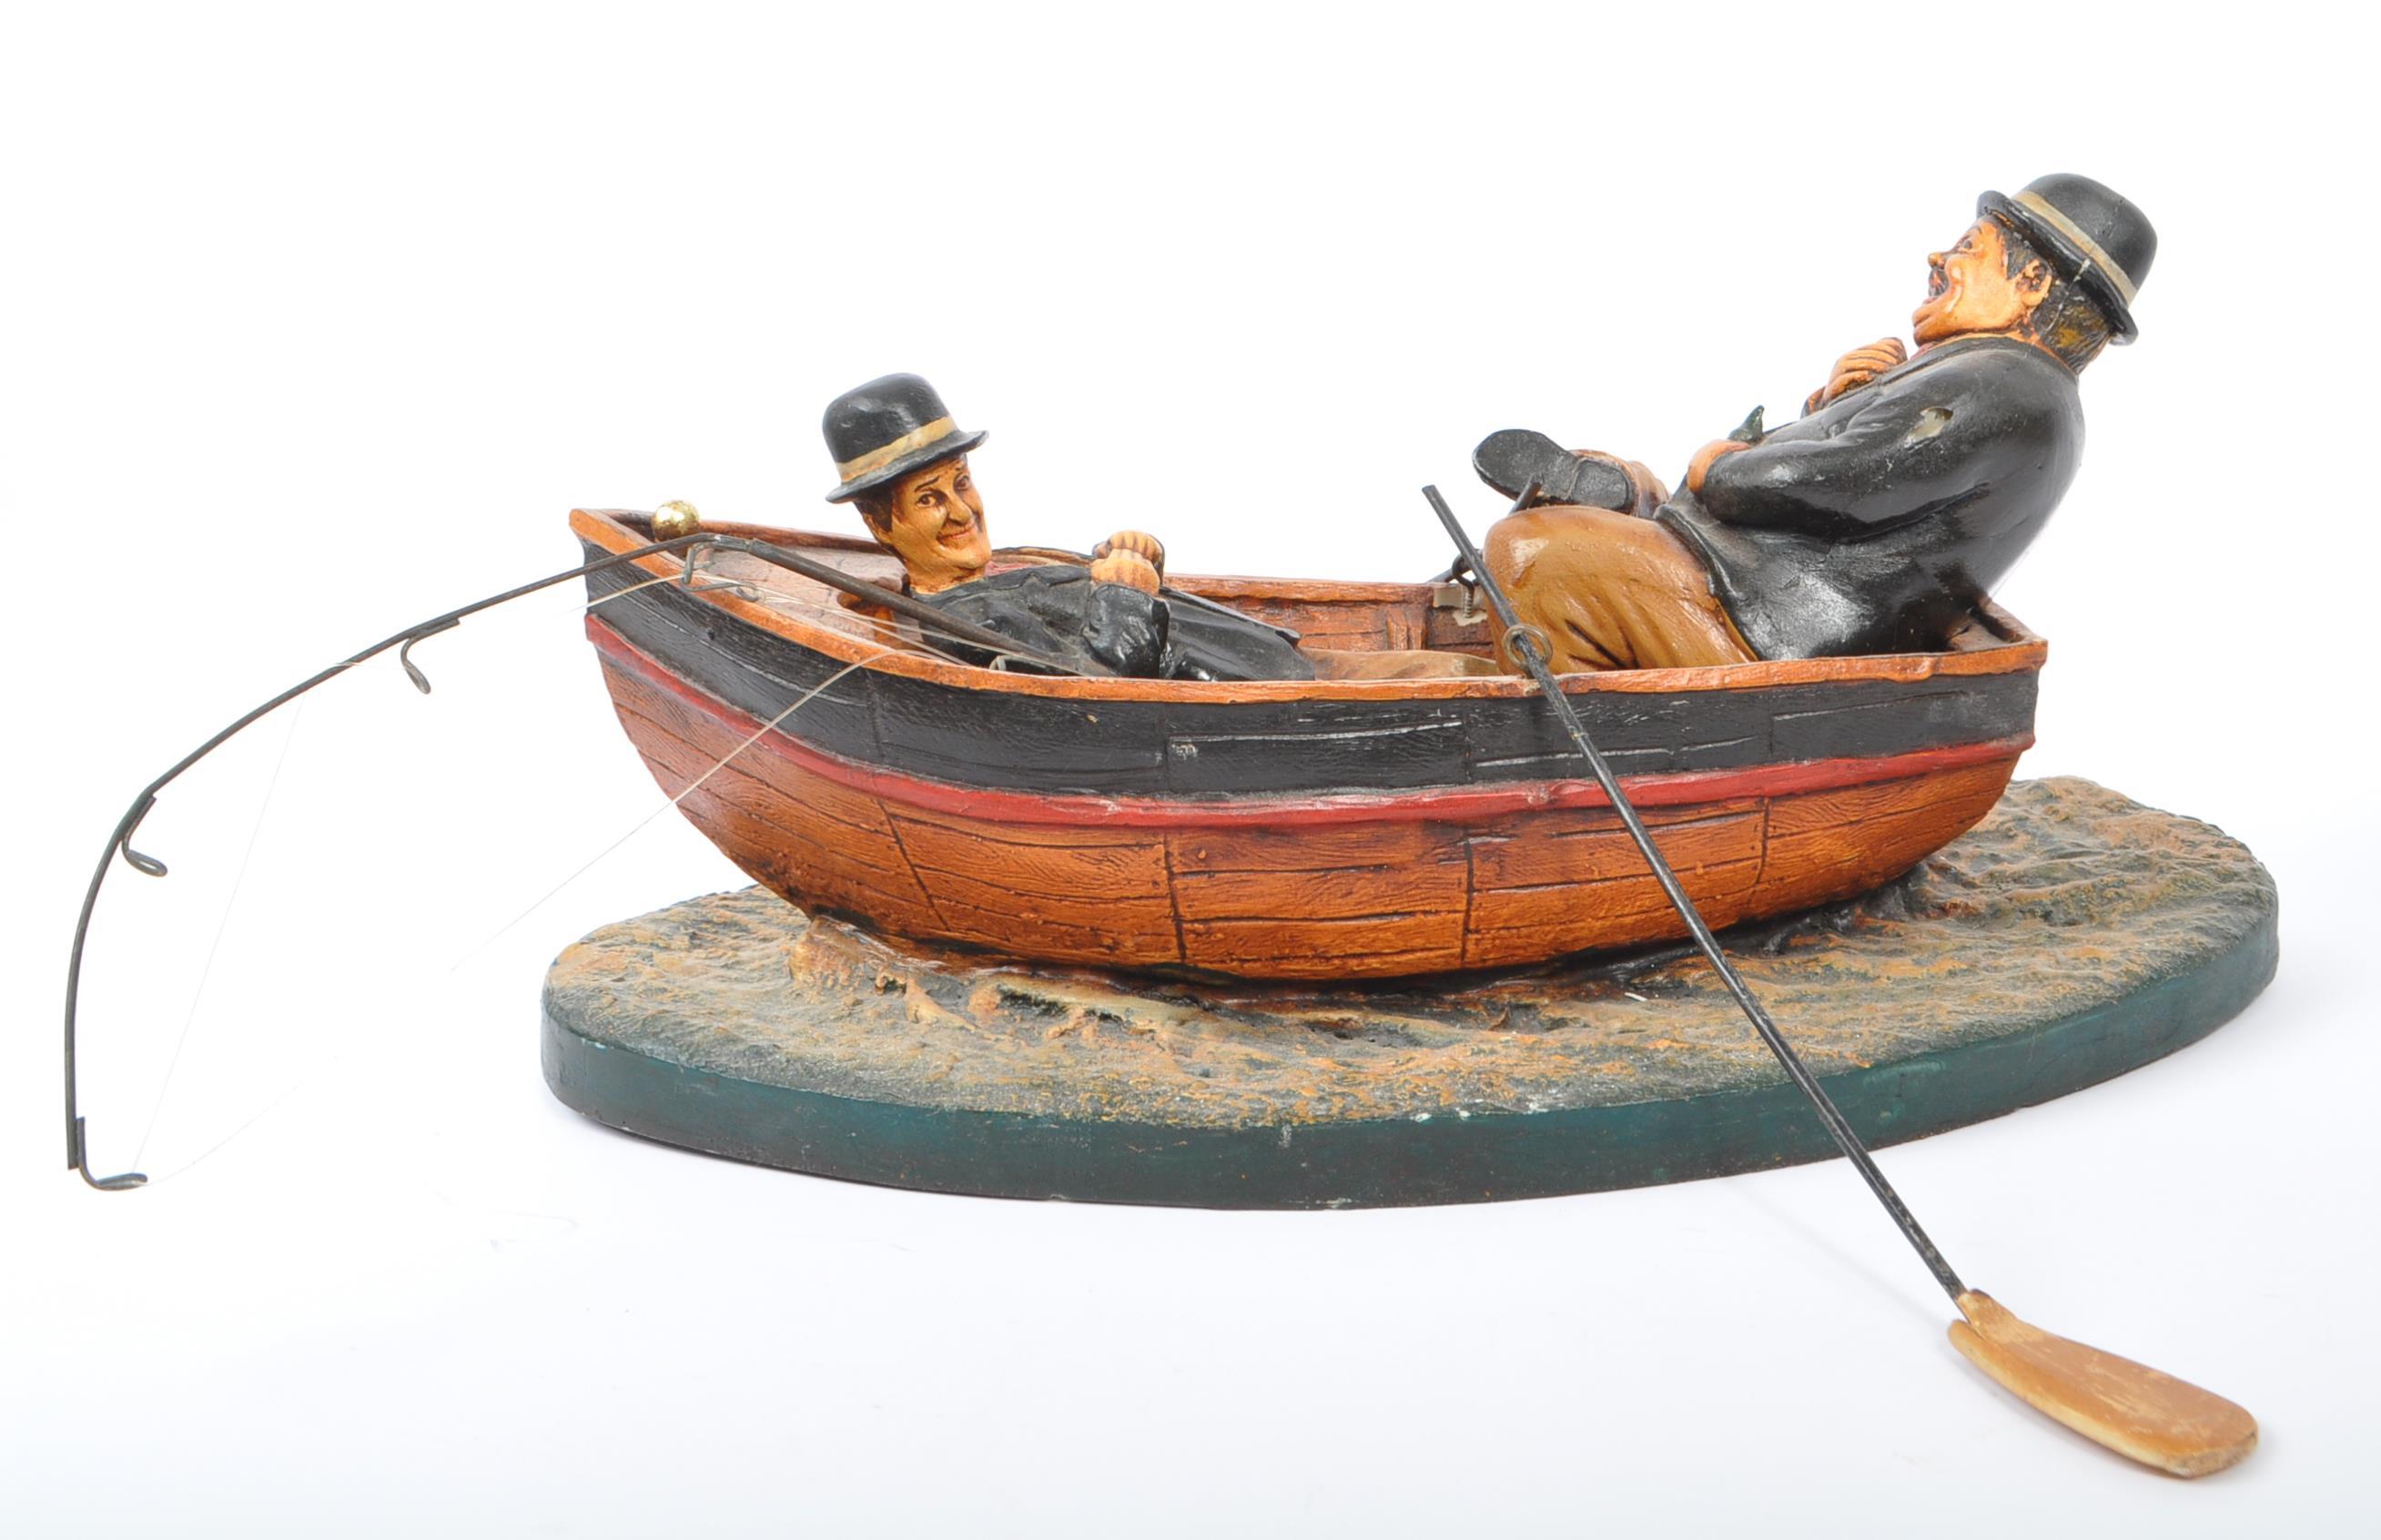 VINTAGE 20TH CENTURY WOODEN MODEL OF A FISHING BOAT - Image 2 of 5